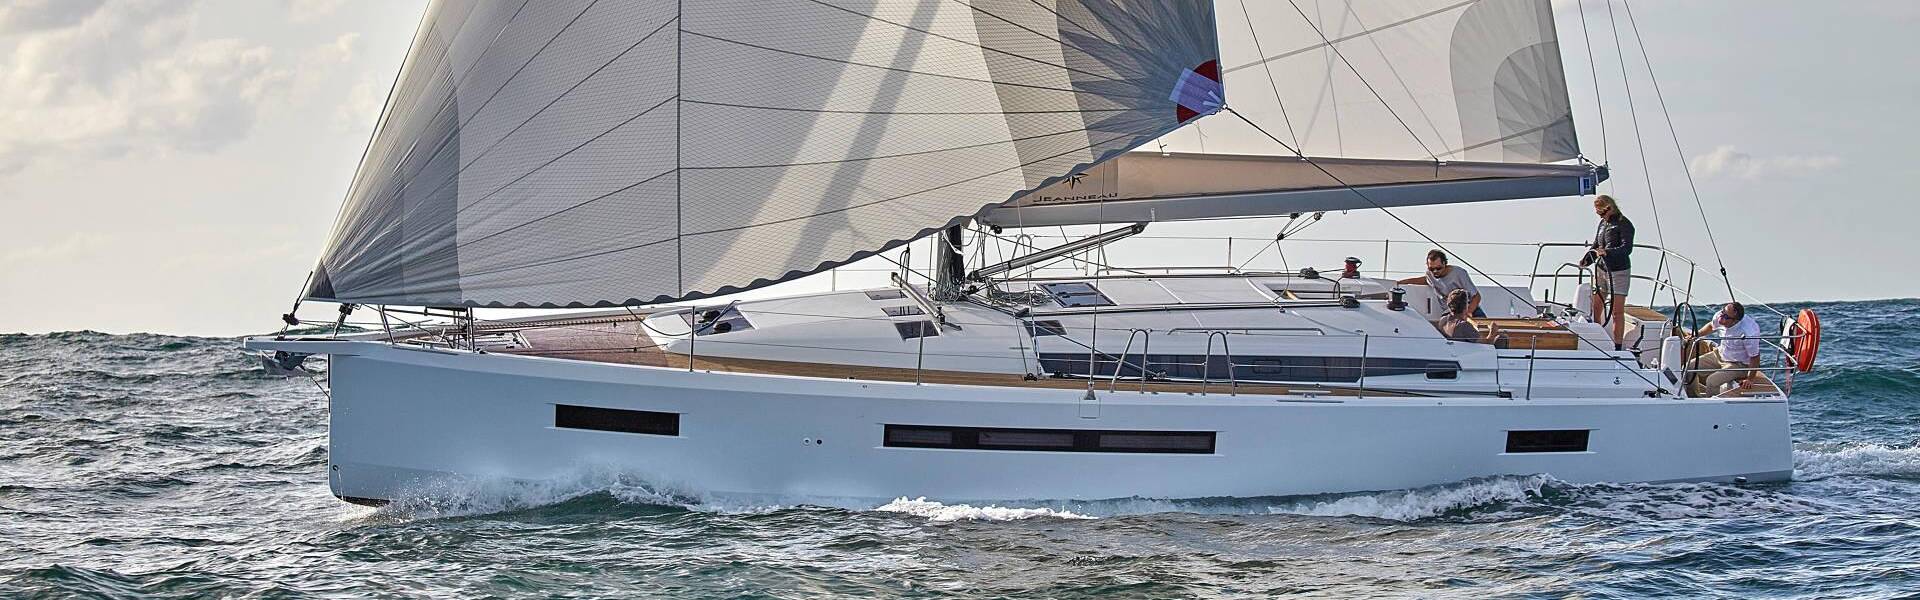 St Augustine Sailing - Jeanneau 490 - All Points Yacht Sales - Sailing - Fun with friends - Boat Ownership - Charters